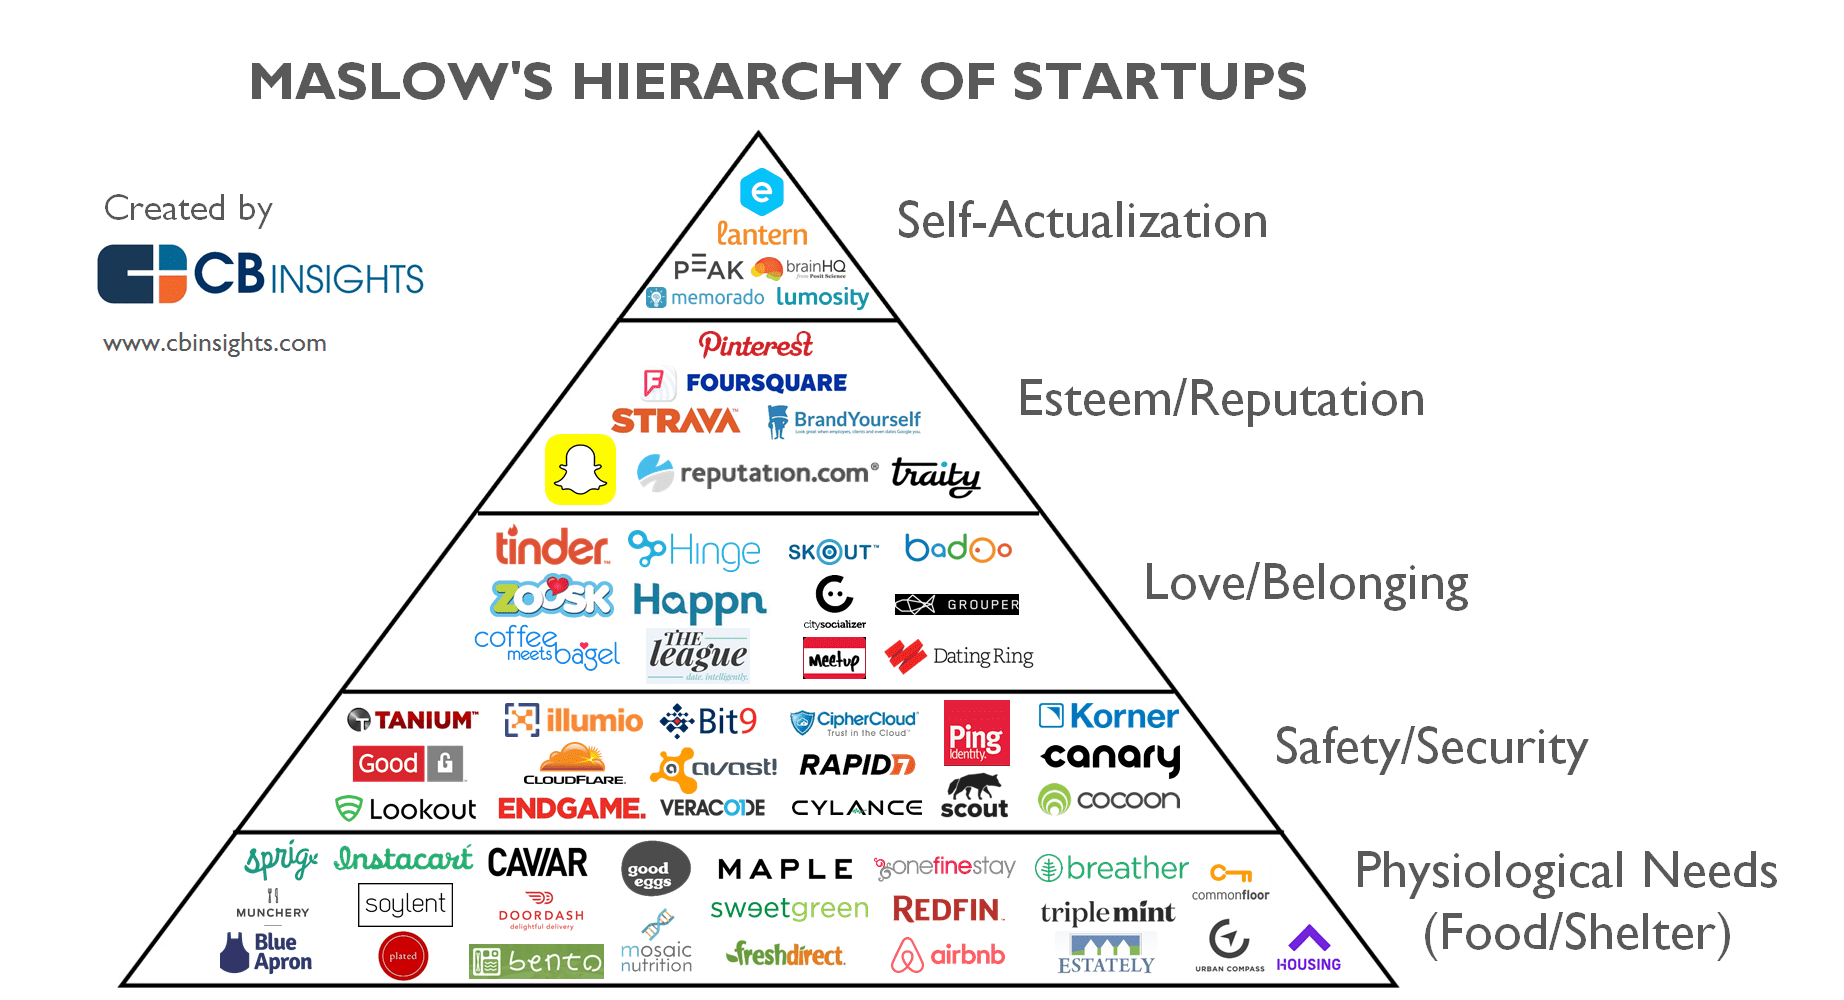 Maslows Hierarchy of Famous Startups